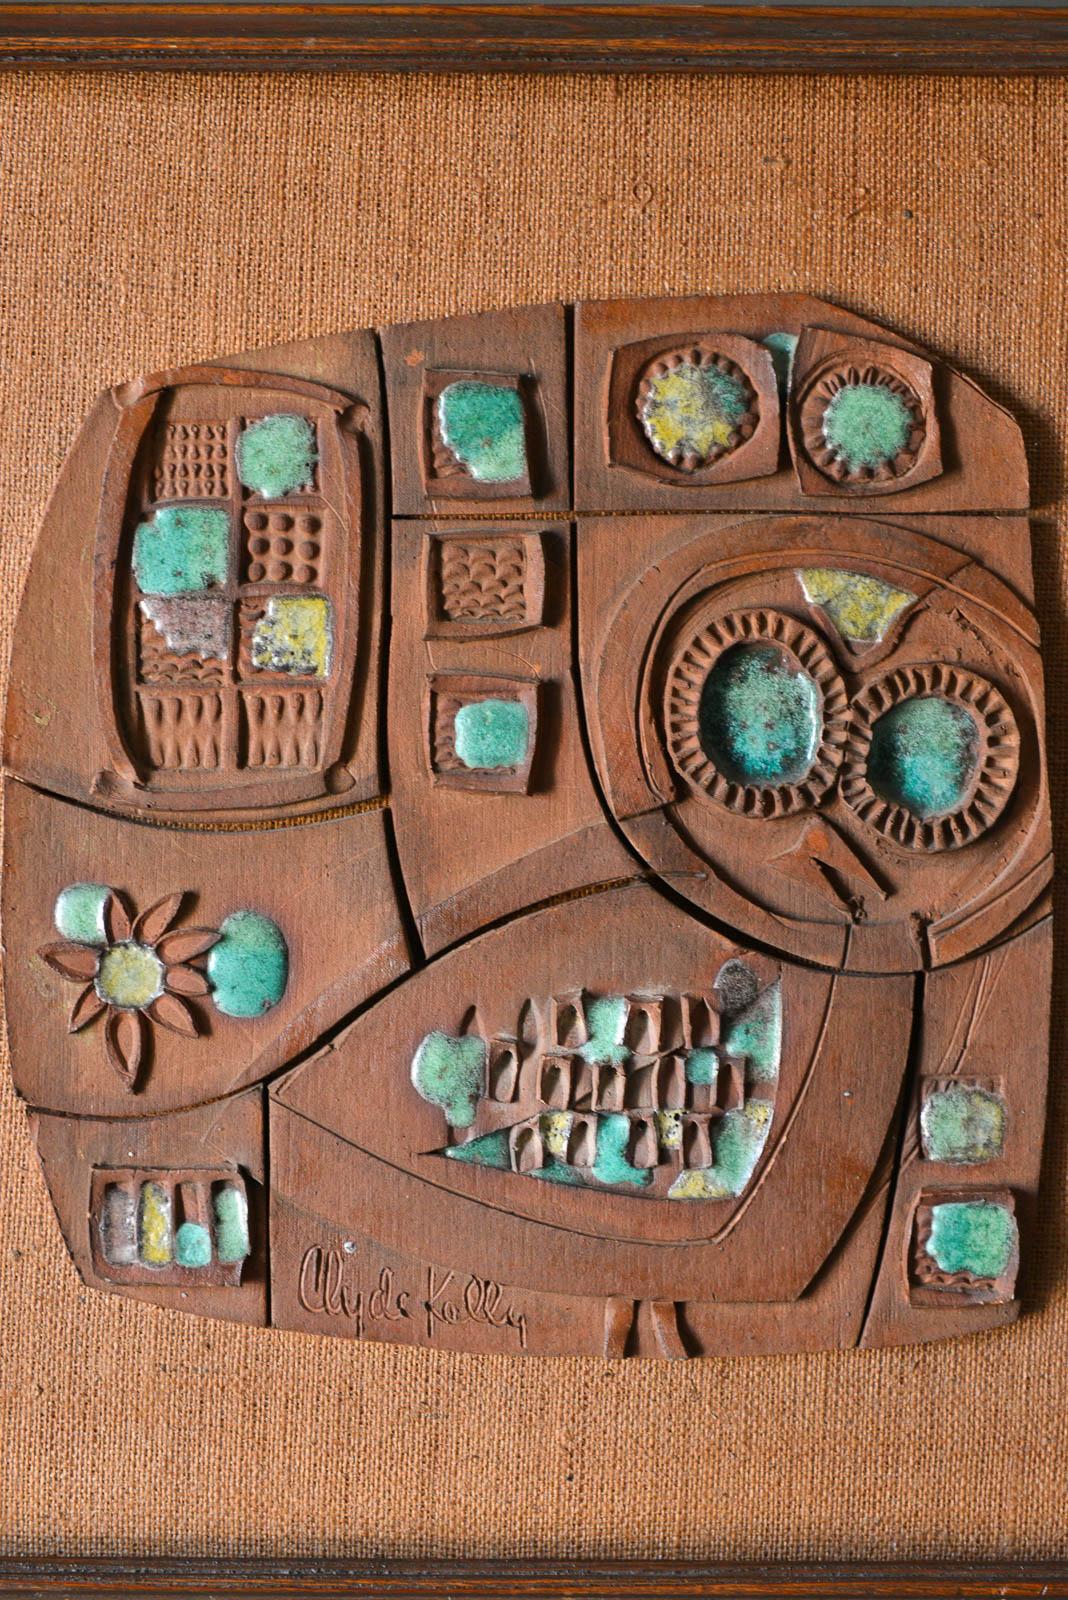 Ceramic panel by California Artist/Craftsman Clyde Kelly, circa 1968. Beautiful ceramic stoneware with bits of glaze in this abstract form. Original framing with burlap backing. Signed by the artist.

Measures: 26